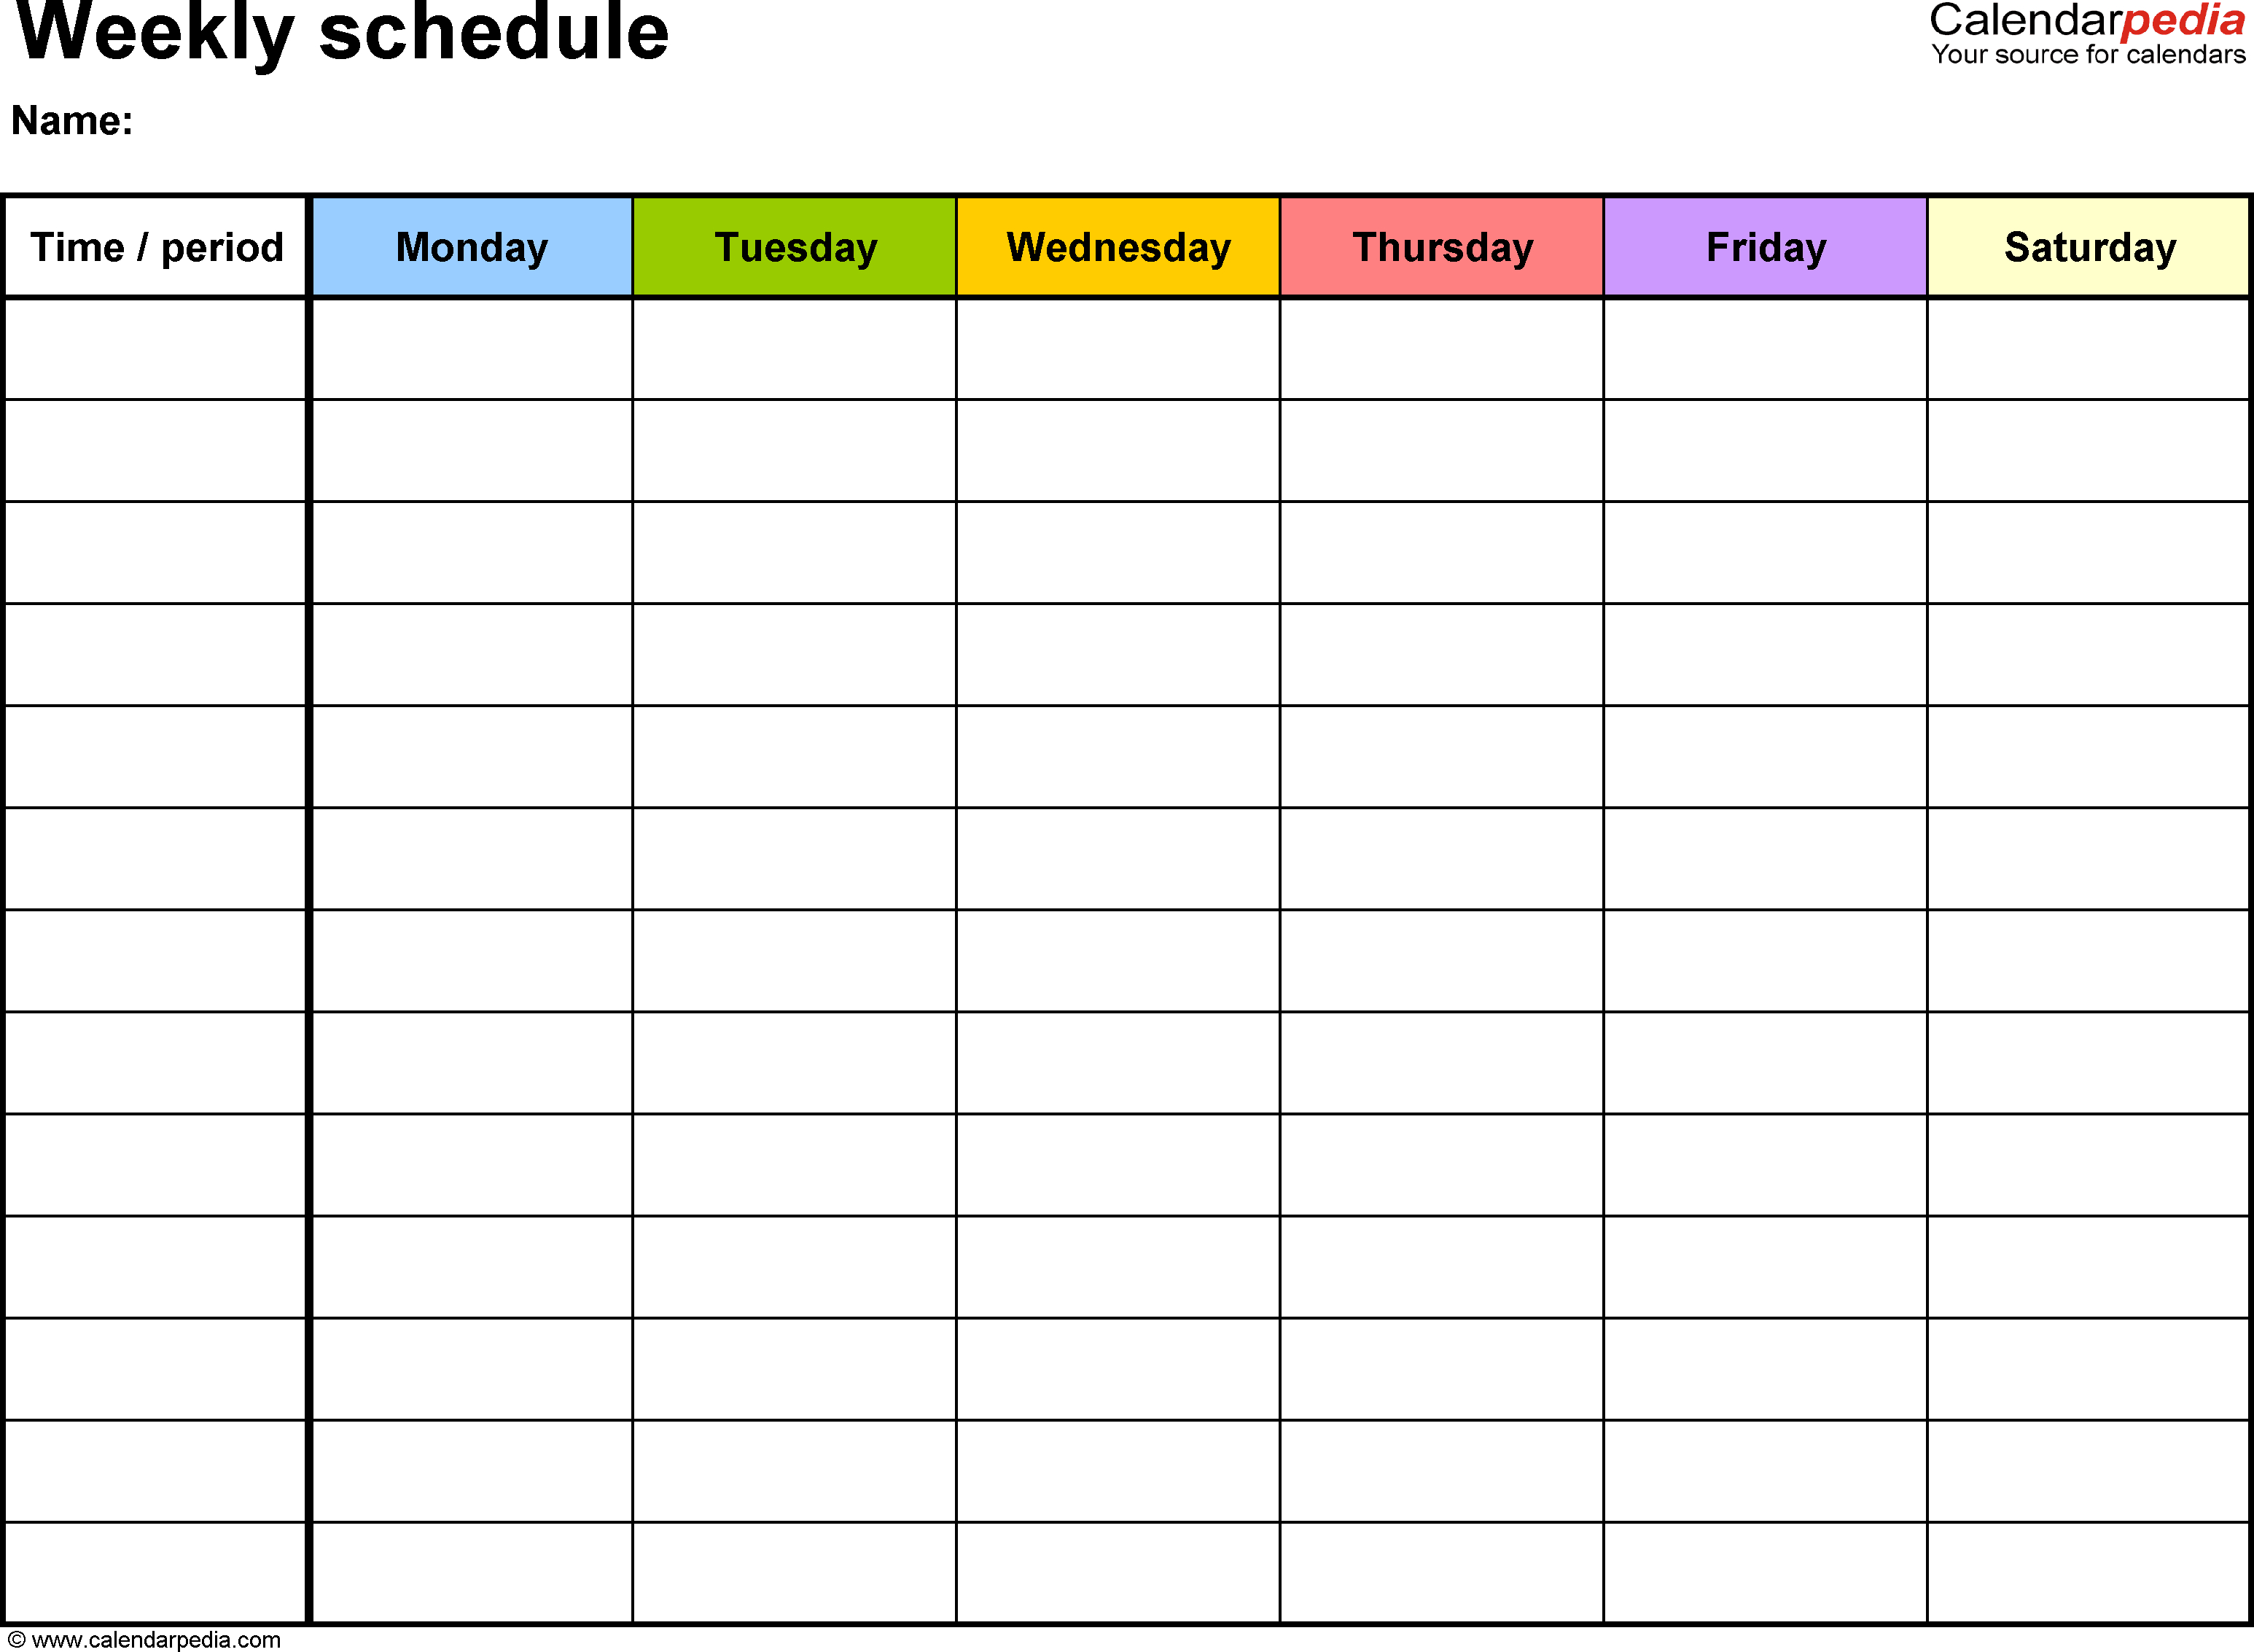 Free Weekly Schedule Templates For Word - 18 Templates With Printable Employee Schedule Templates